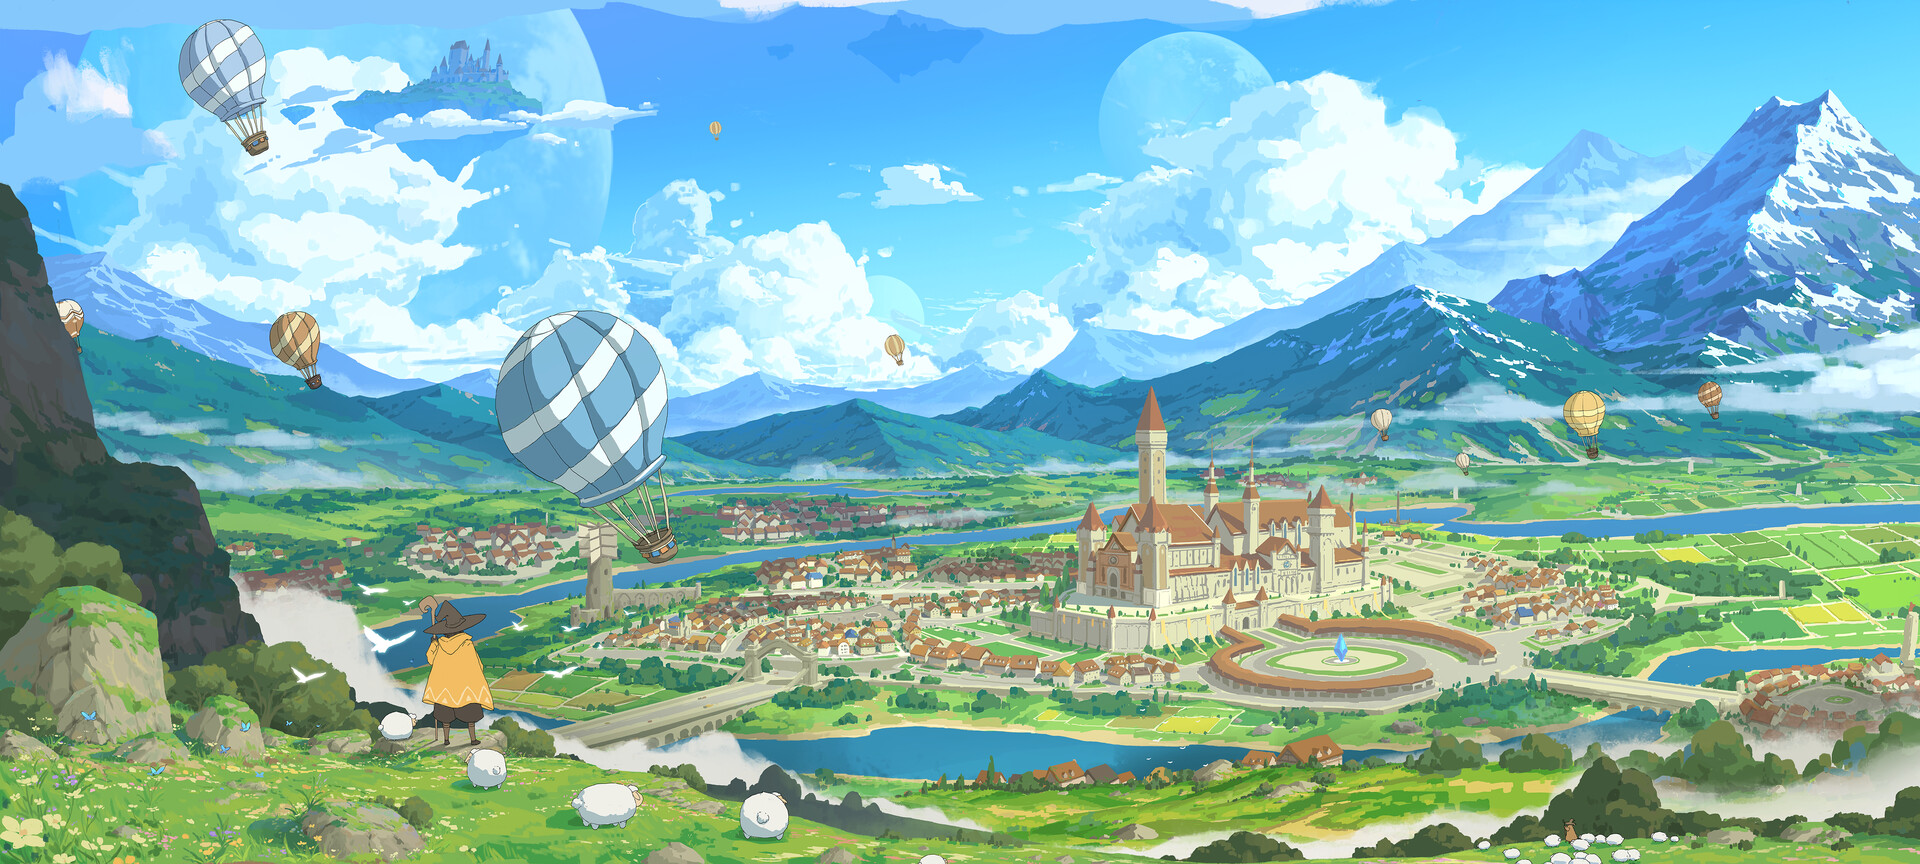 Digital Art Mountains Clouds Water Hot Air Balloons City Animals Sheep Cityscape Sky 1920x864